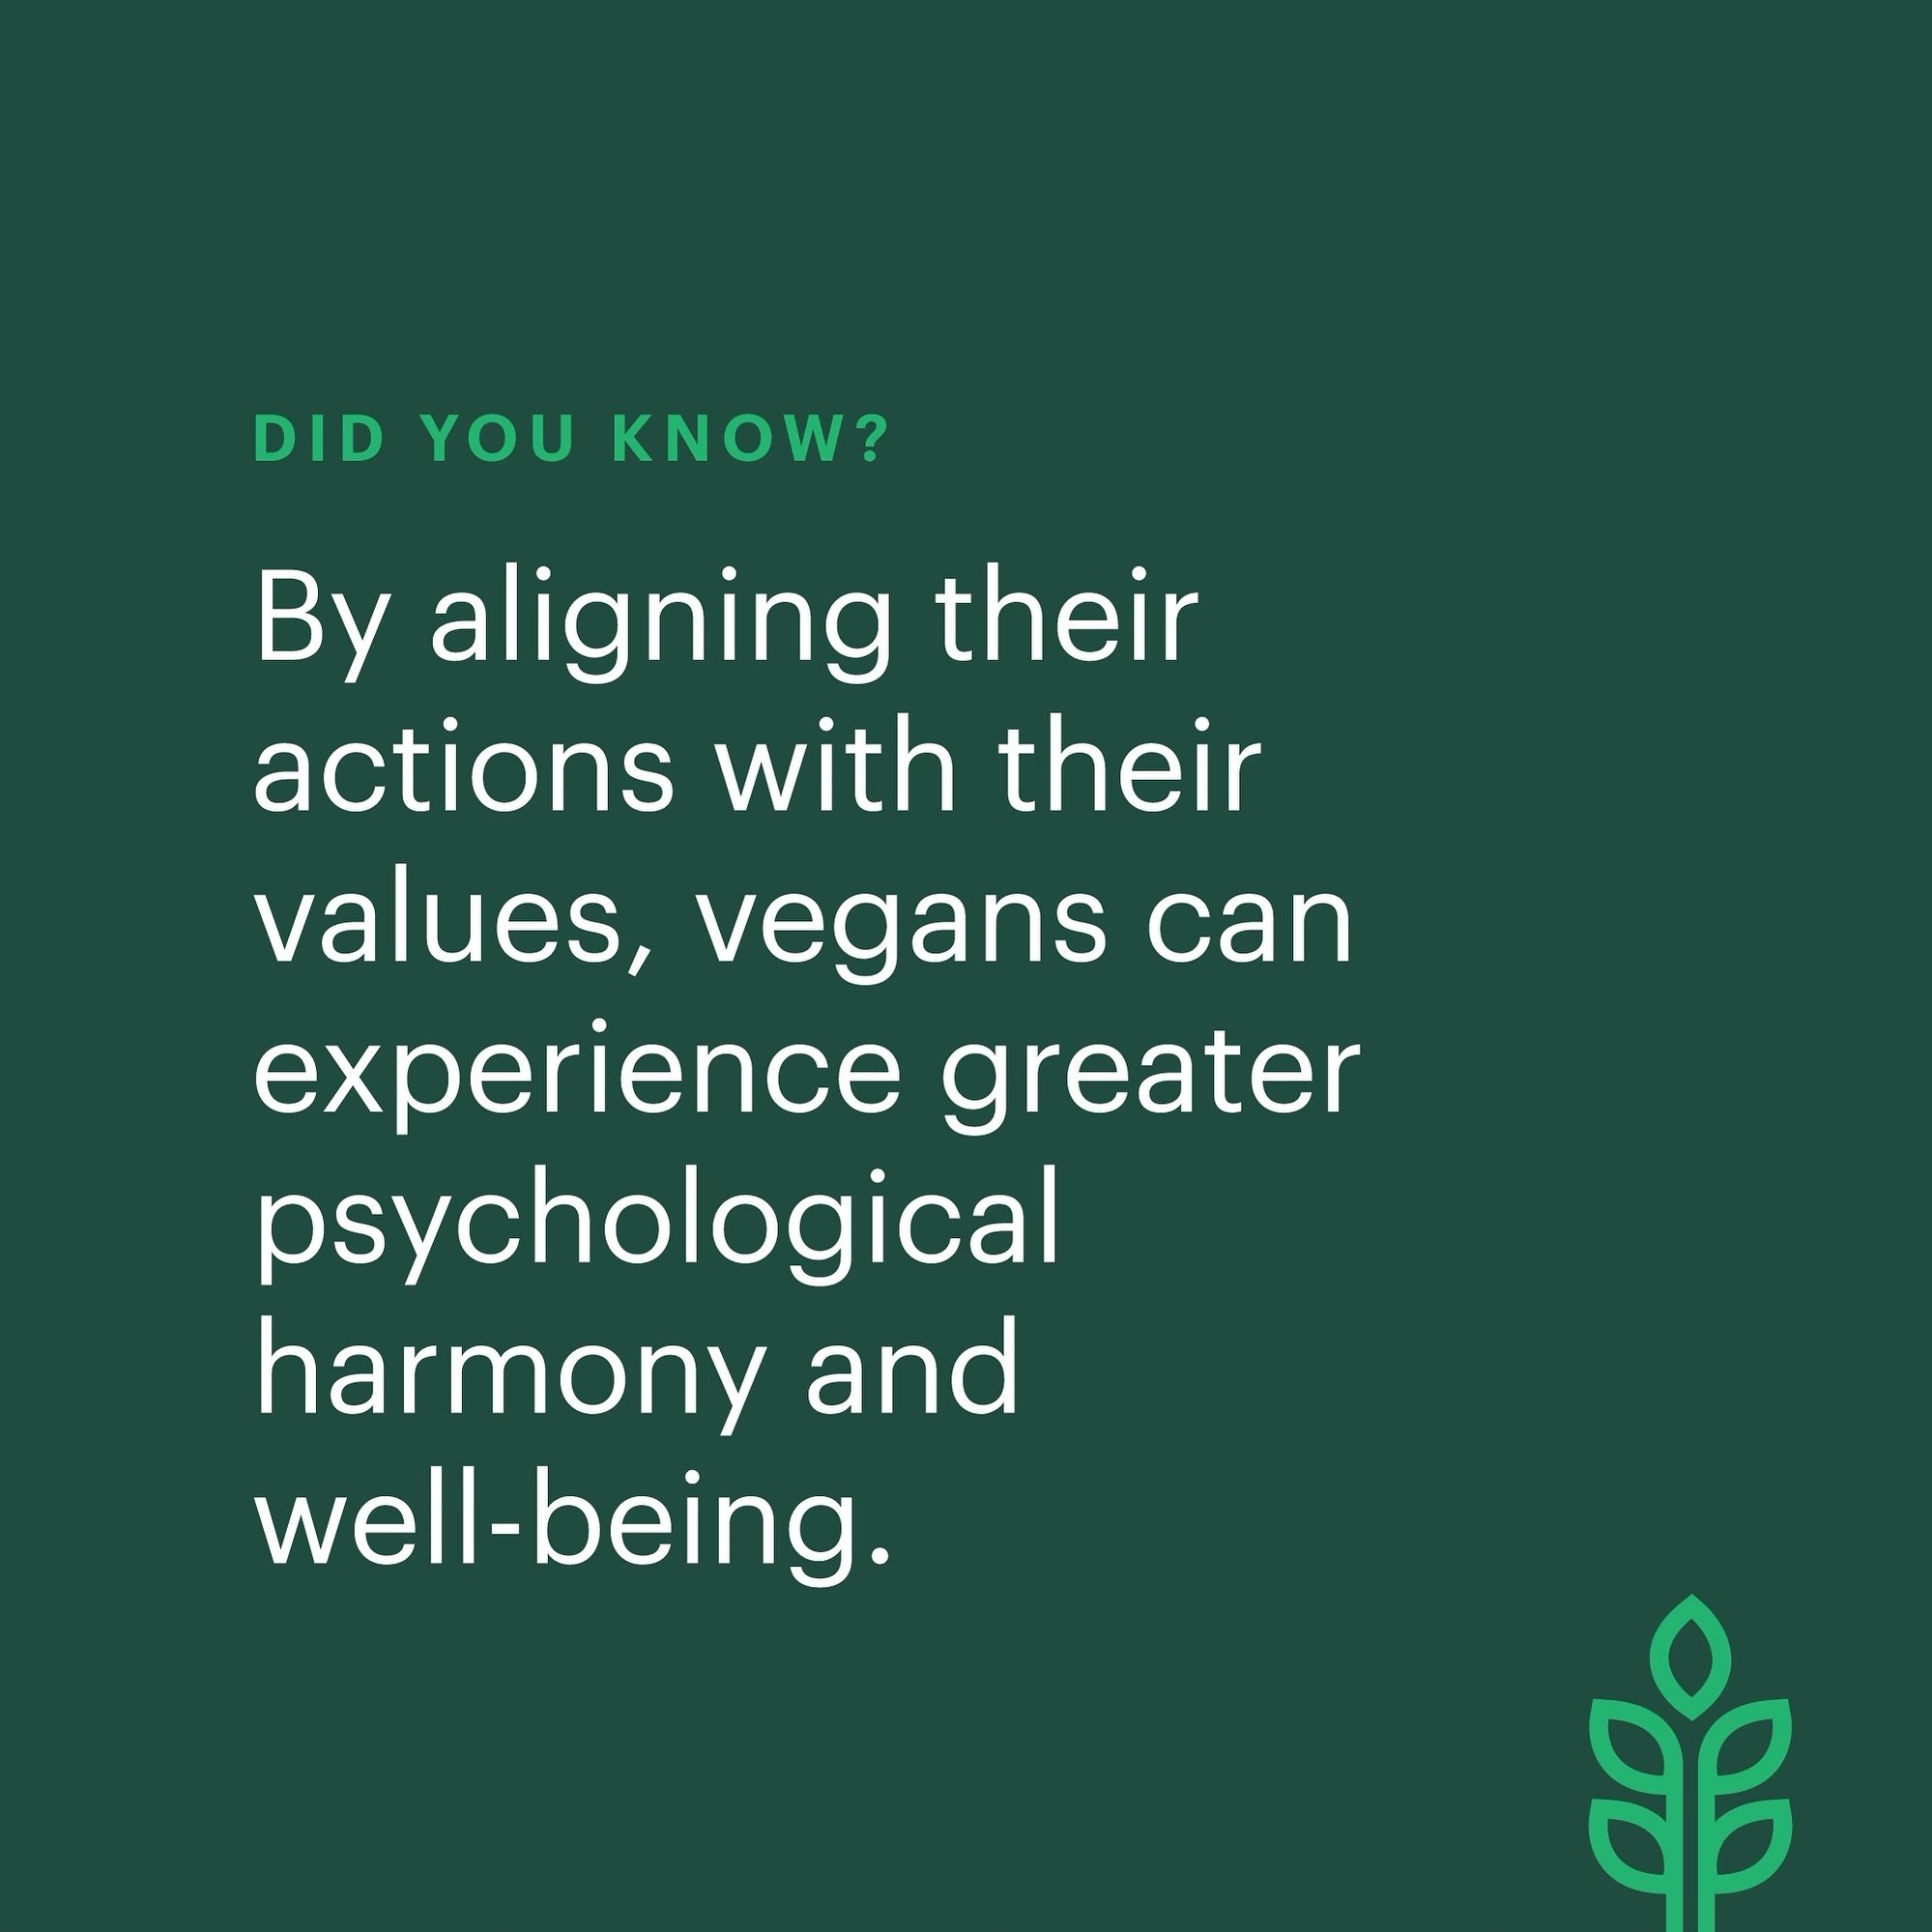 Adopting a vegan lifestyle can significantly reduce cognitive dissonance, a psychological phenomenon where conflicting beliefs and behaviors cause mental discomfort. By aligning dietary choices with ethical beliefs about animal welfare, environmental